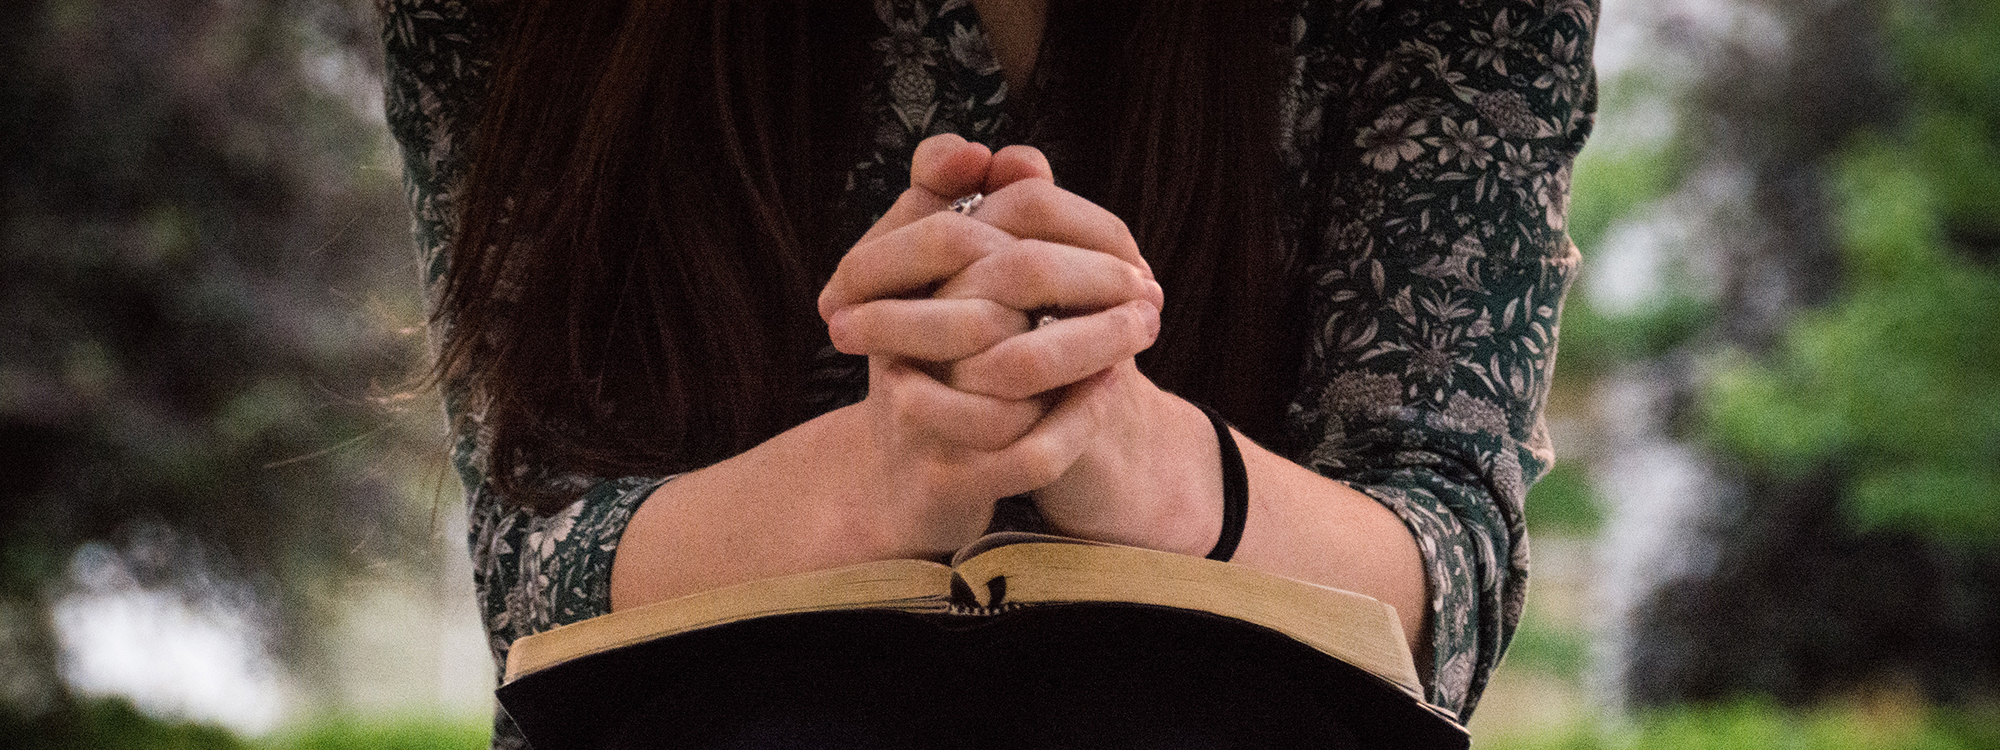 a person with a book on their lap praying